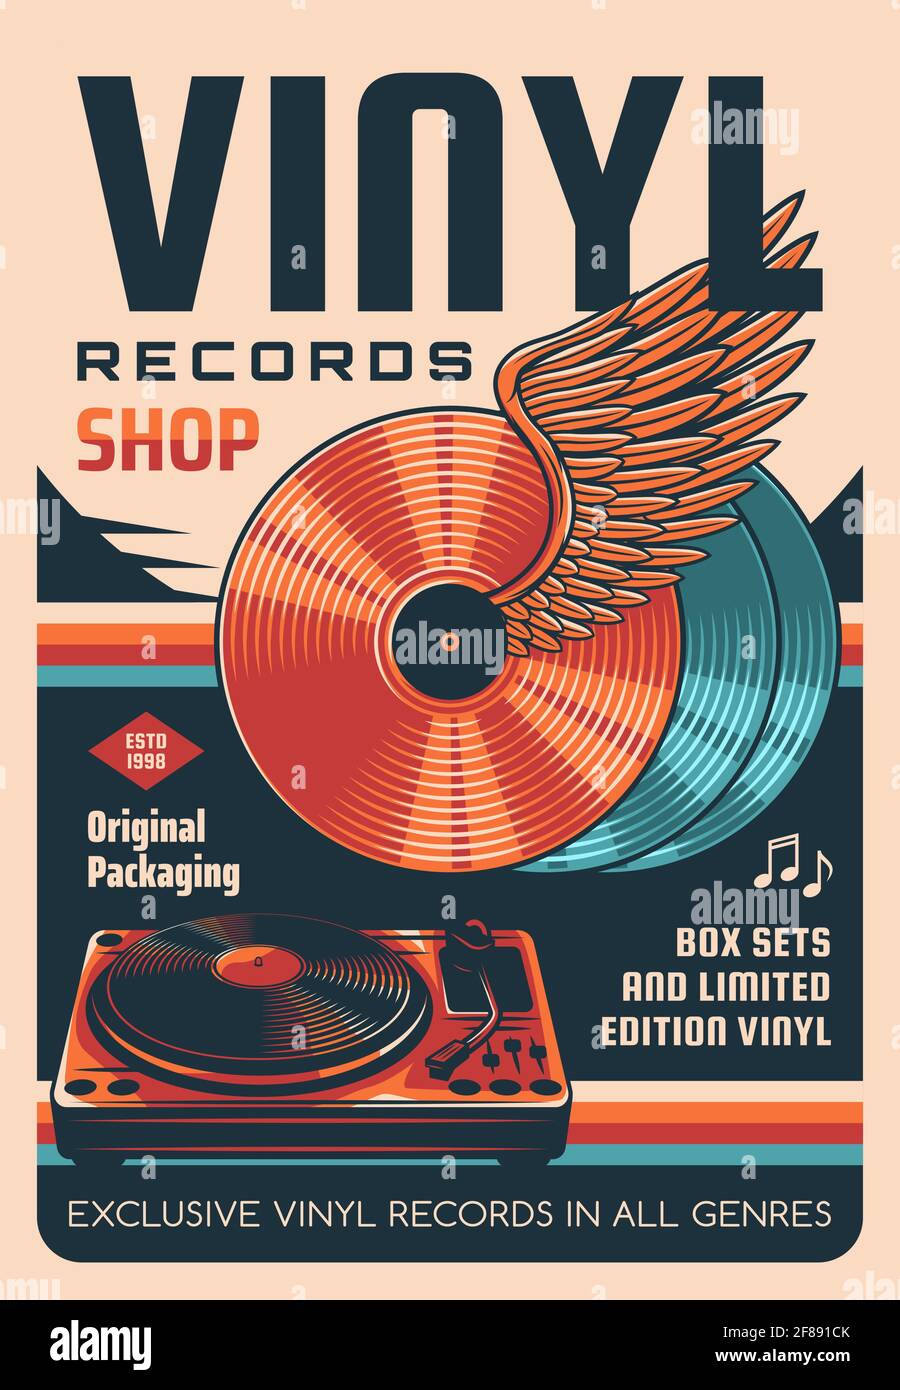 Vinyl records shop vector retro poster. Winged vinyl discs, DJ records turntable. Old music records store, audiophile hobby shop promo banner with aud Stock Vector